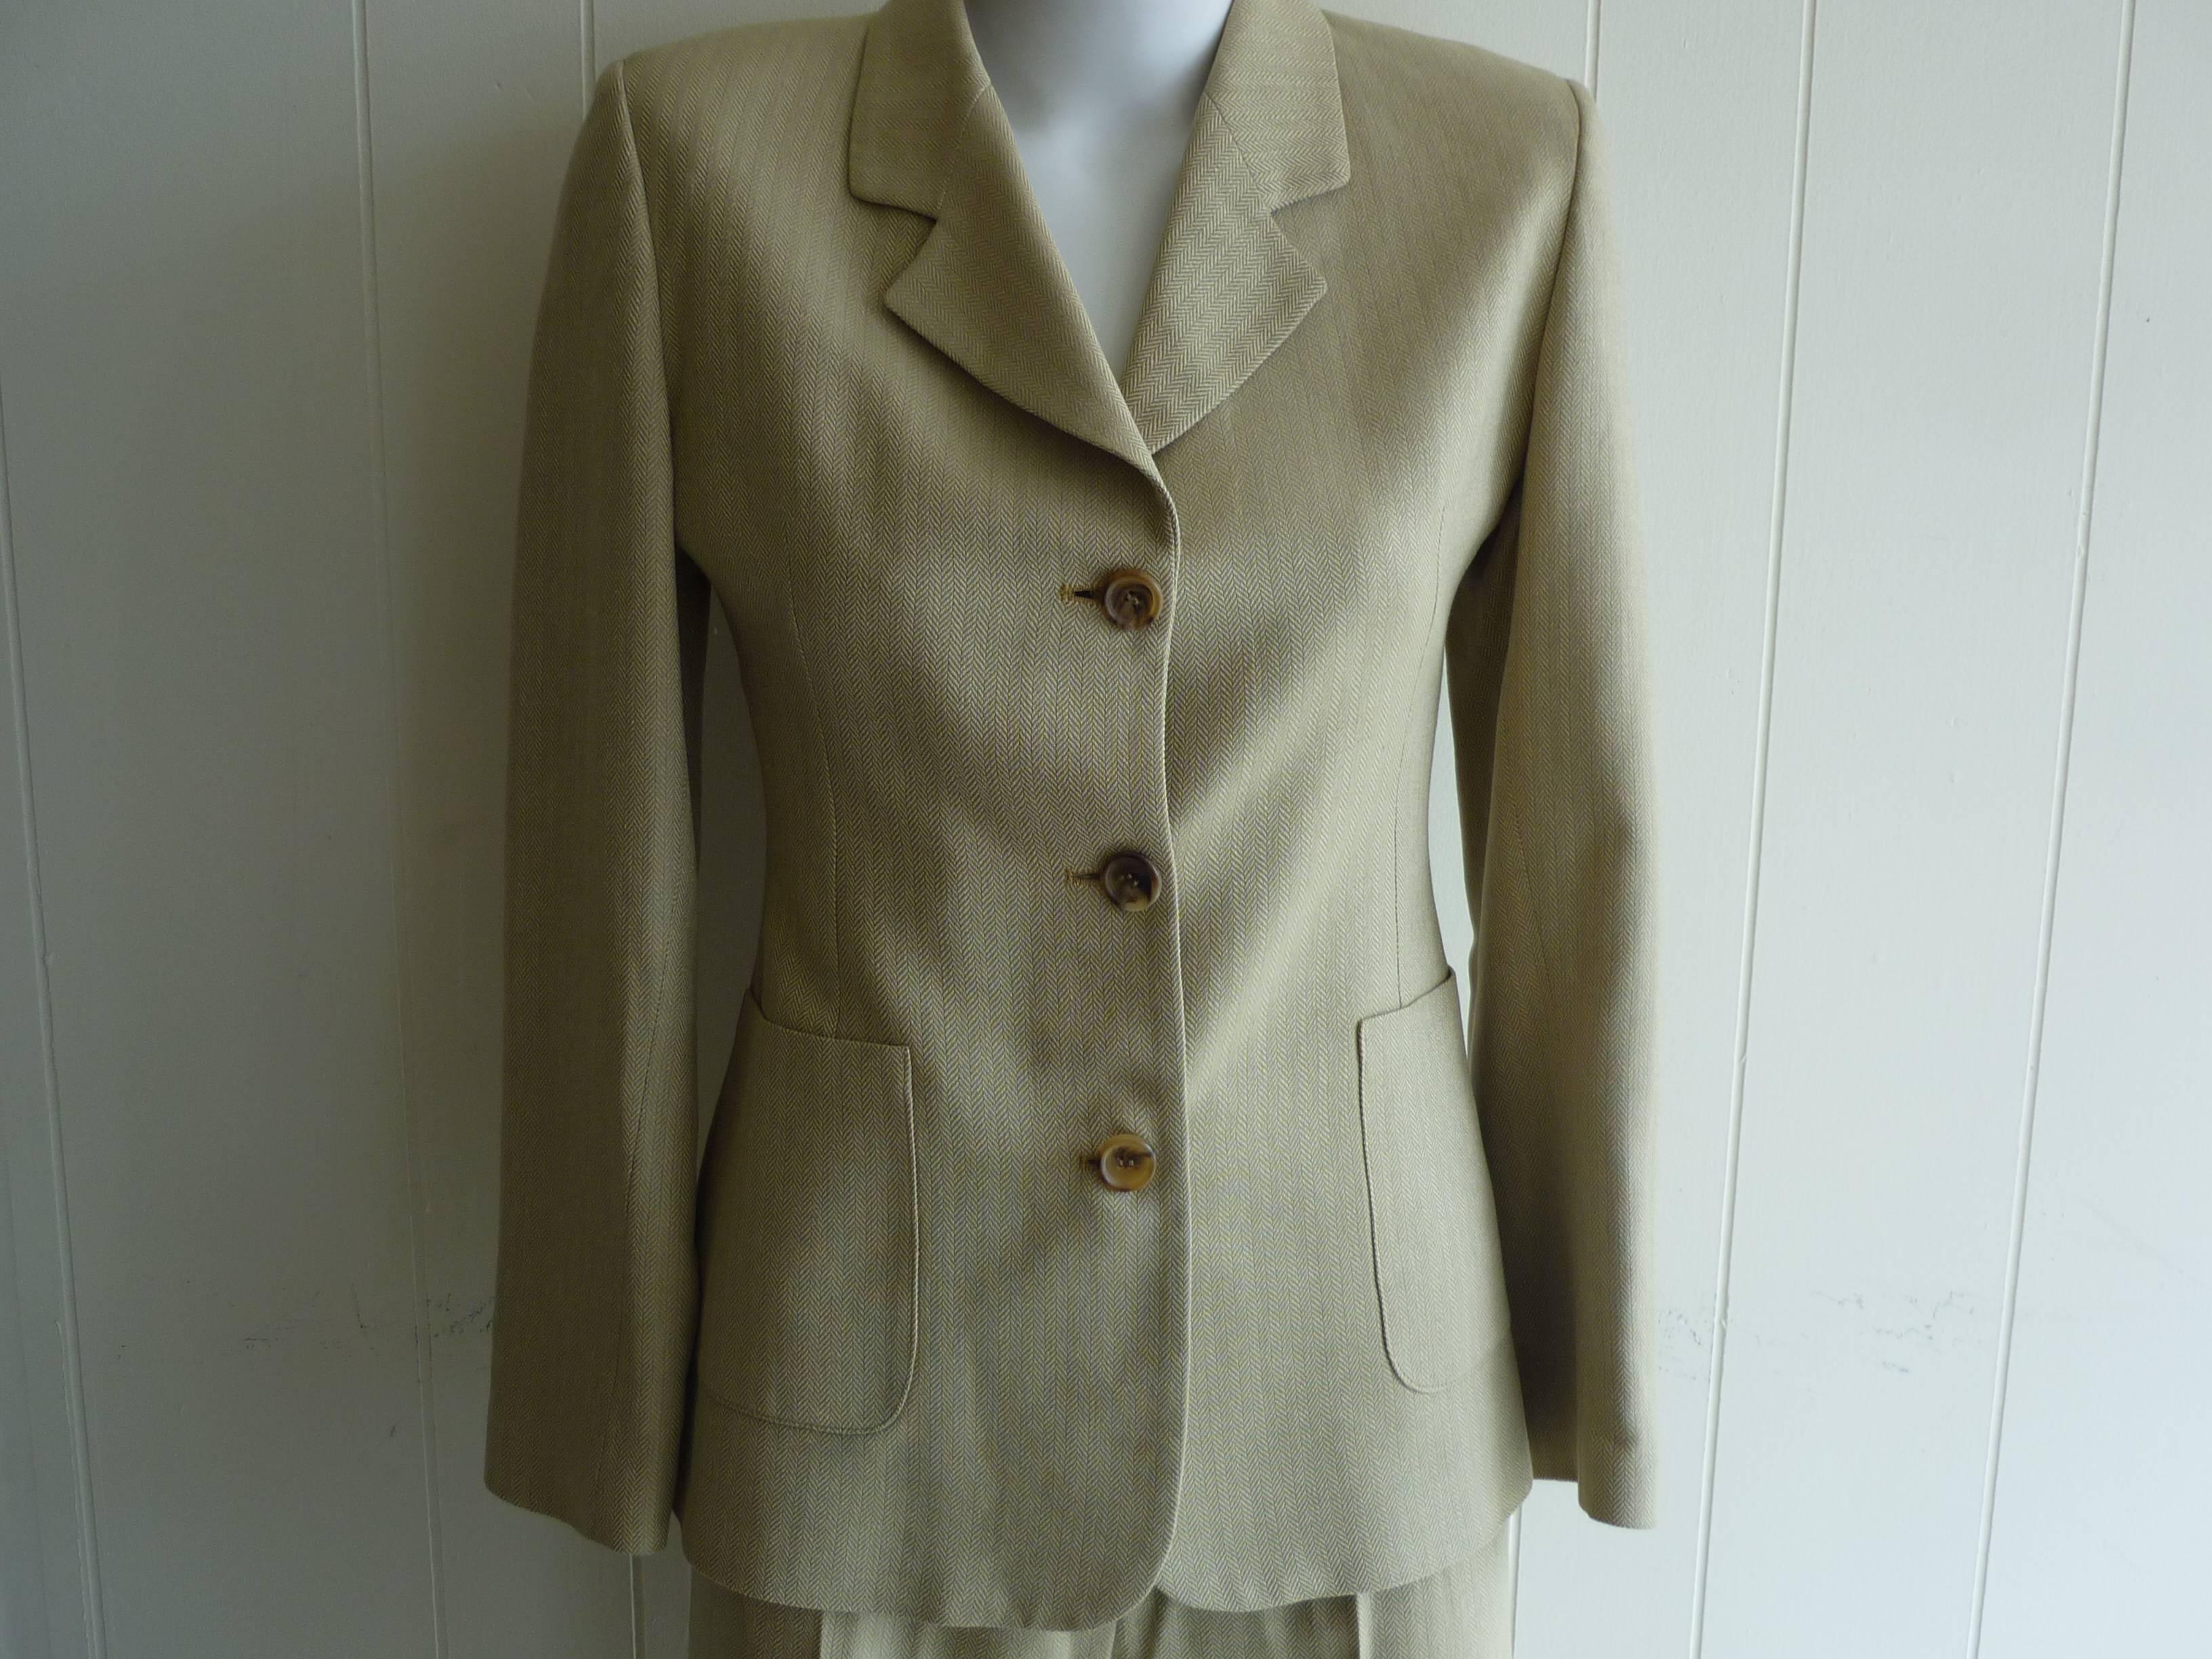 Wonderful herringbone pattern with a logo lining. The jackets has two pockets on the front and 3 buttons on  each cuff.

The pants have belt loops; a front zip and button closure, and a middle crease on each leg.

This suit will never go out of